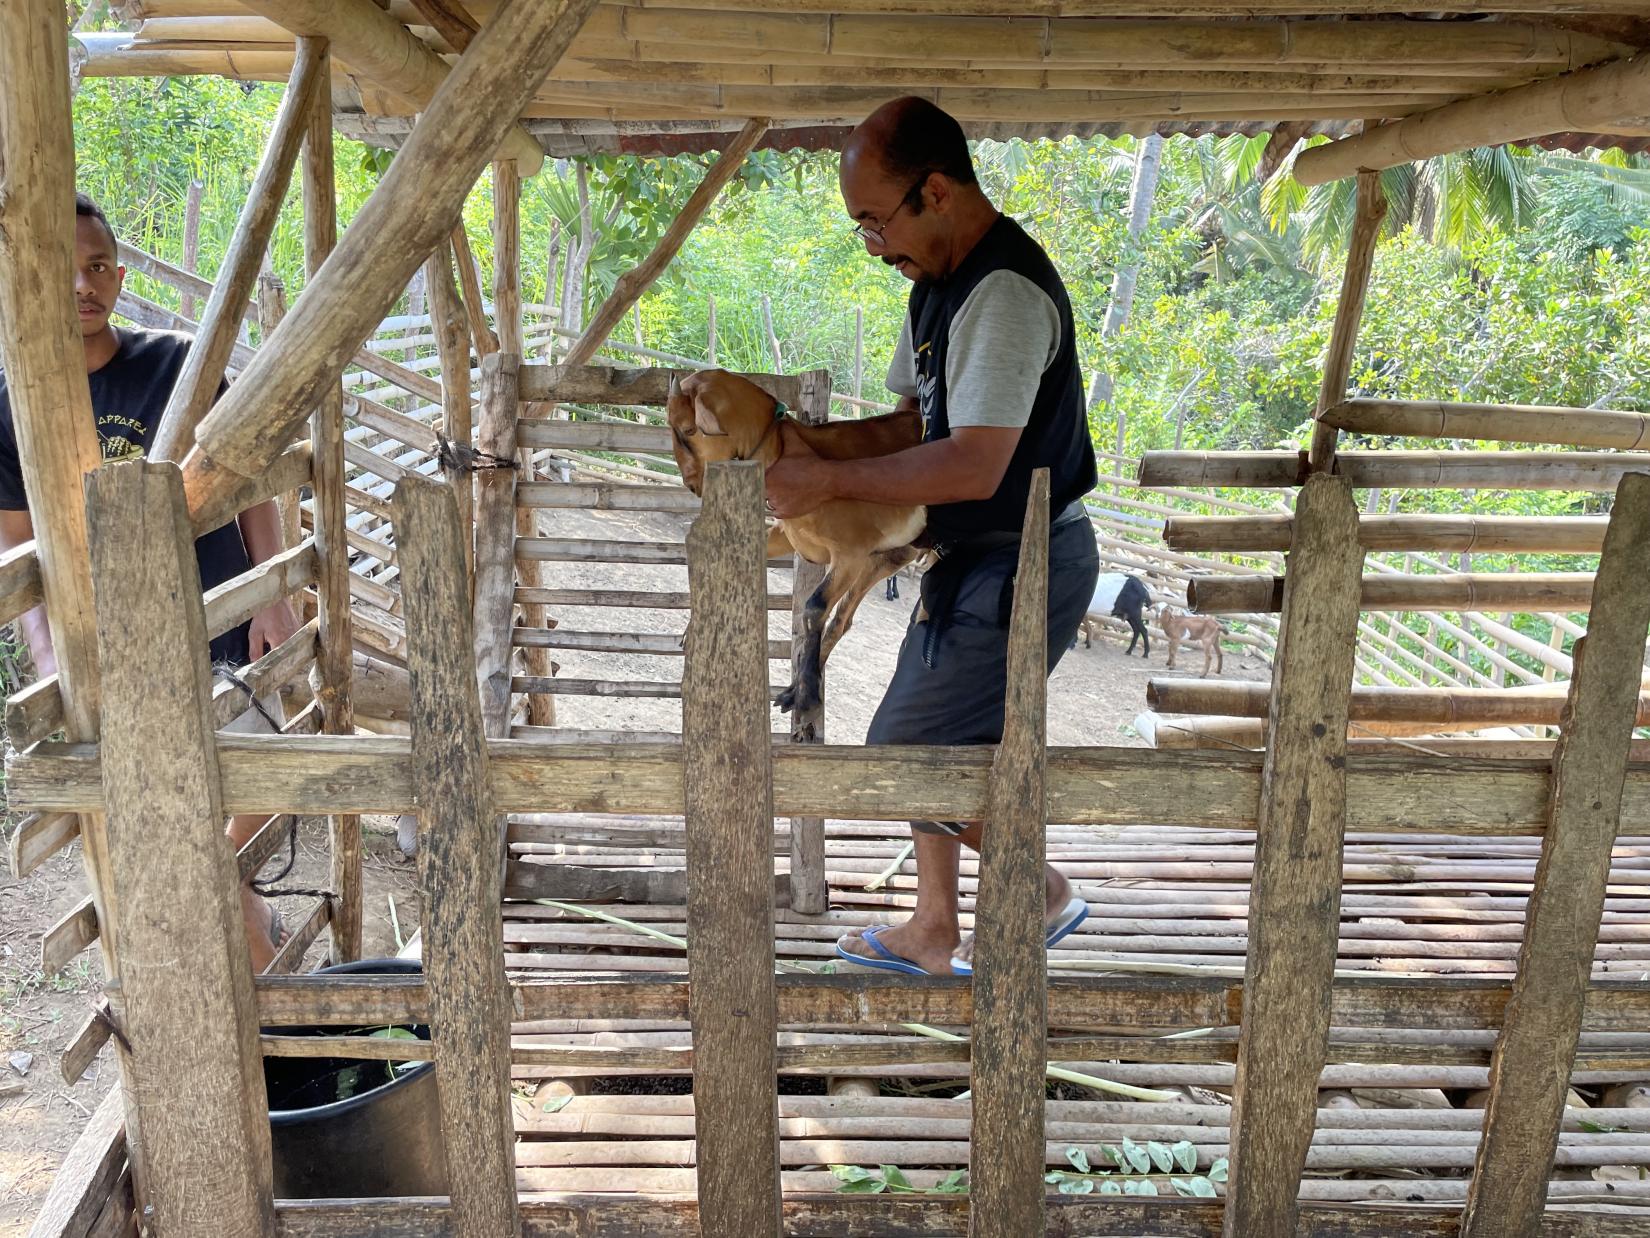 A man holding a brown goat inside an animal cage made from bamboo.